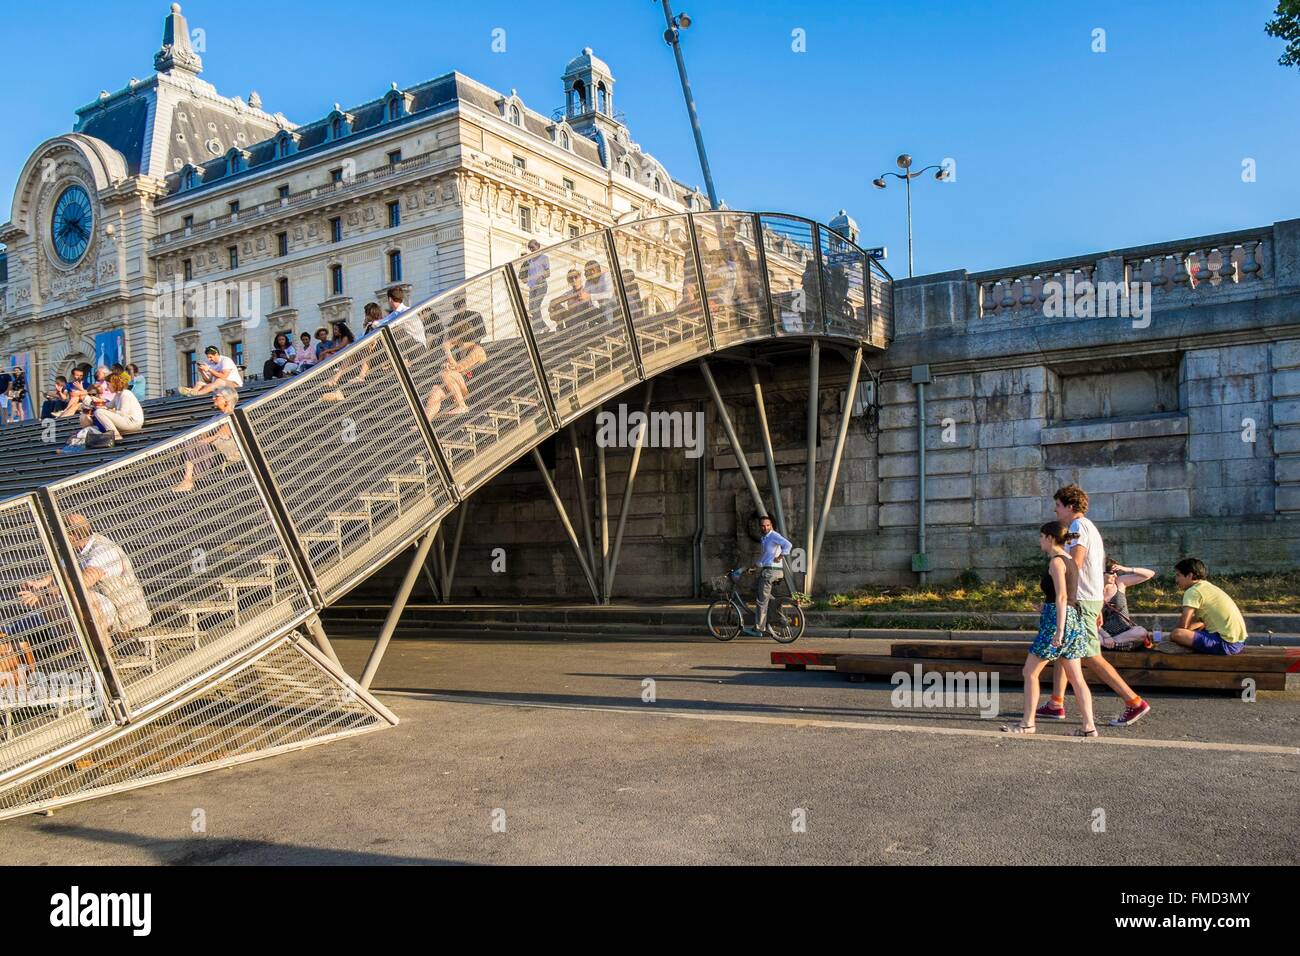 France, Paris, the Orsay Museum and the staircase that spans the Nouvelles Berges (New Banks) Stock Photo